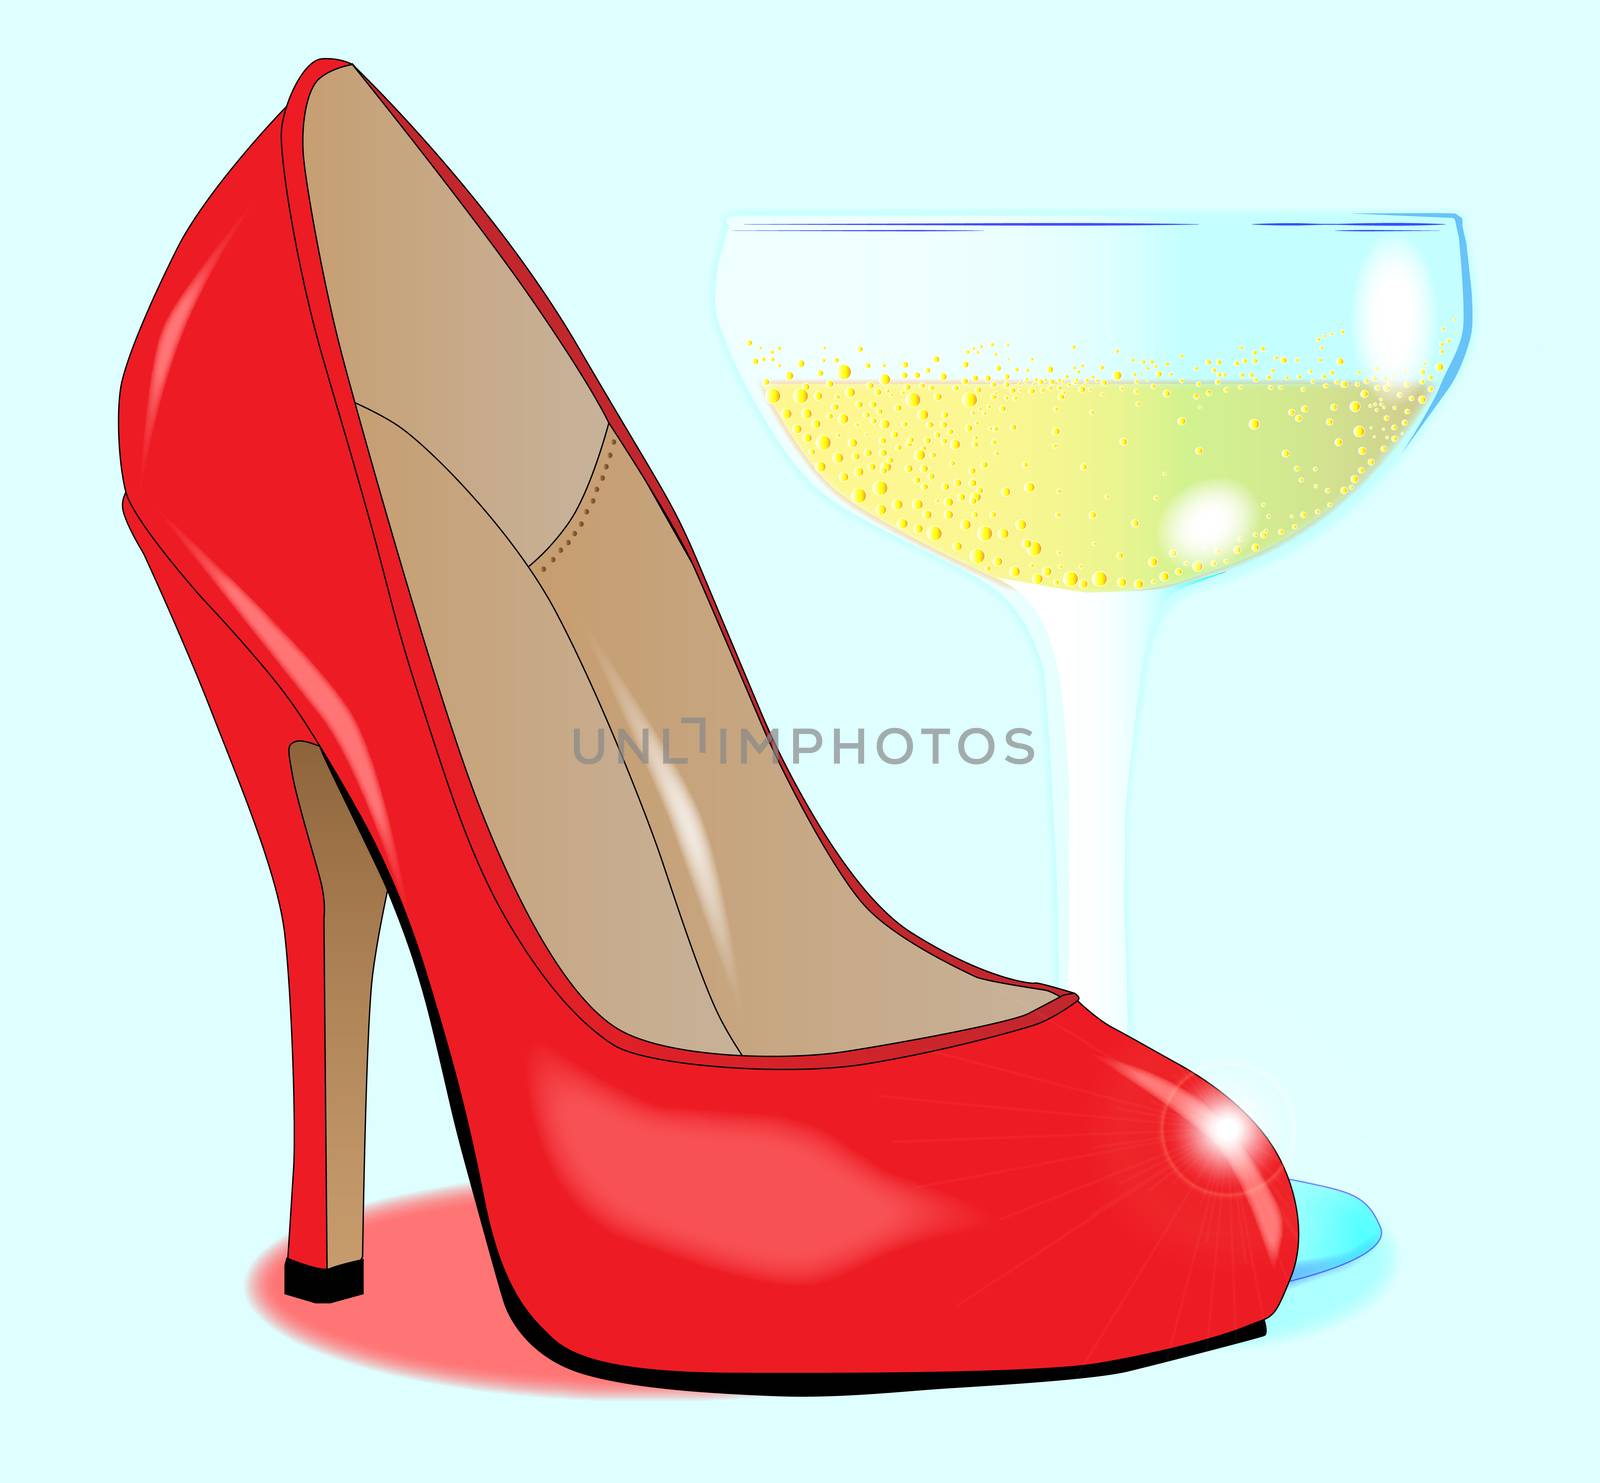 A red stiletto heal show by a glass of champagne.